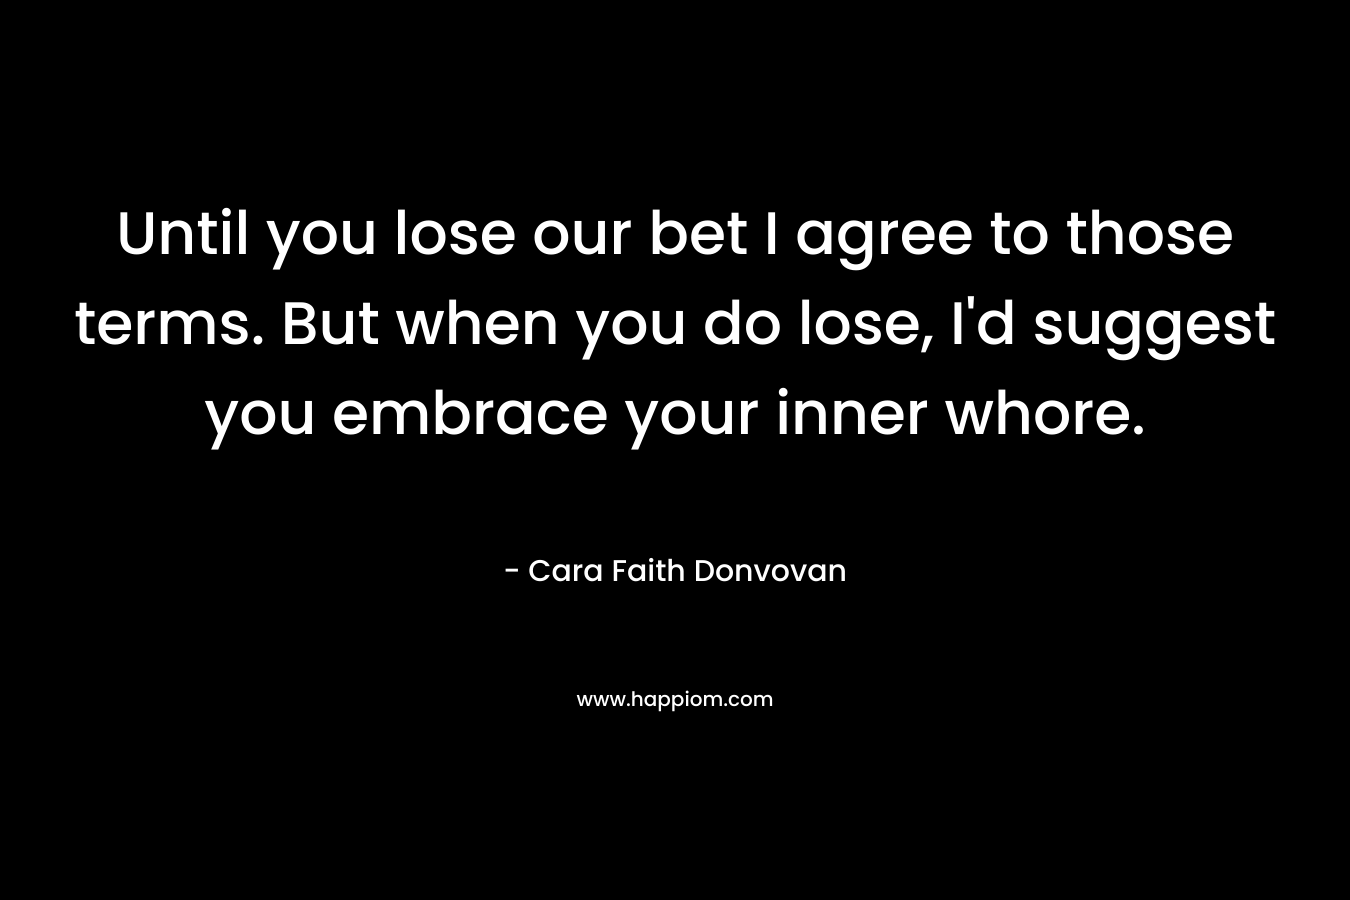 Until you lose our bet I agree to those terms. But when you do lose, I'd suggest you embrace your inner whore.